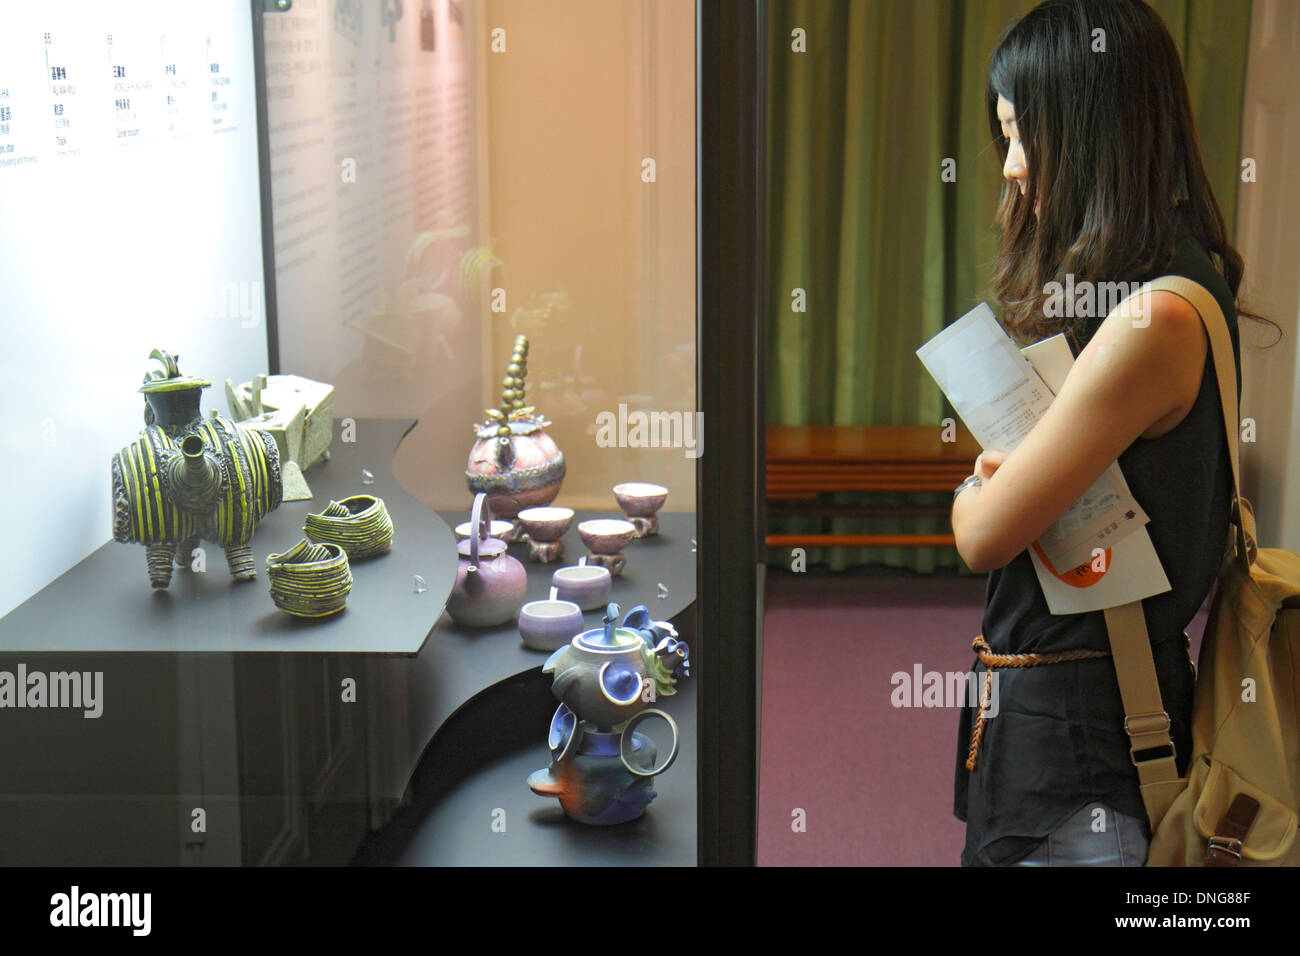 Hong Kong China,HK,Asia,Chinese,Oriental,Island,Central,Hong Kong Park,Flagstaff House Museum Of Tea Ware,Asian adult,adults,woman female women,lookin Stock Photo